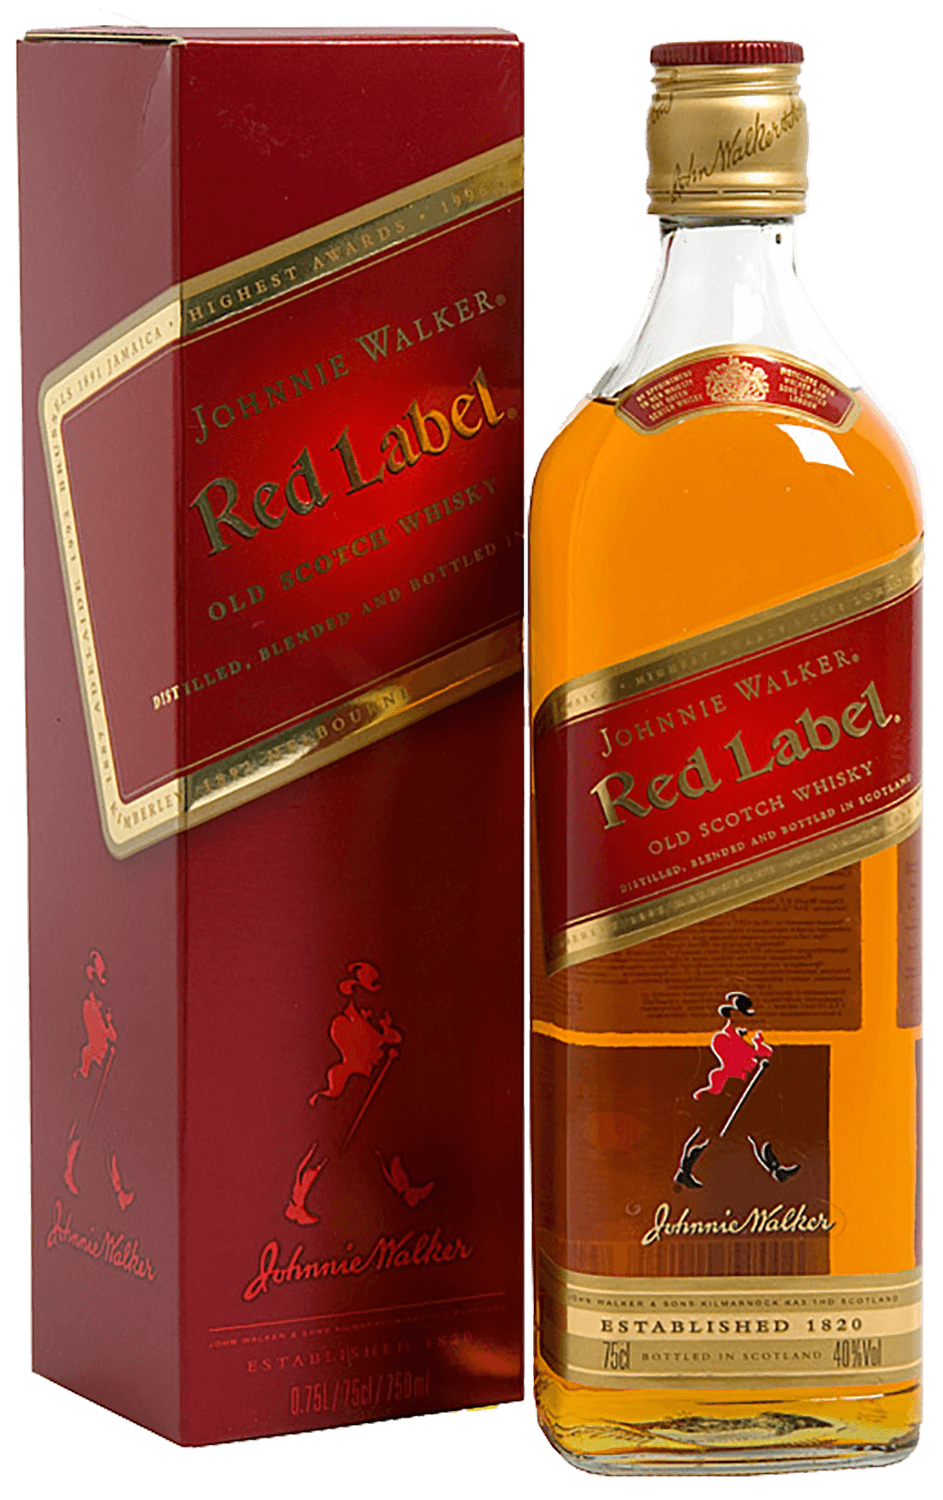 Johnnie Walker Red Label Blended Scotch Whisky (gift box)